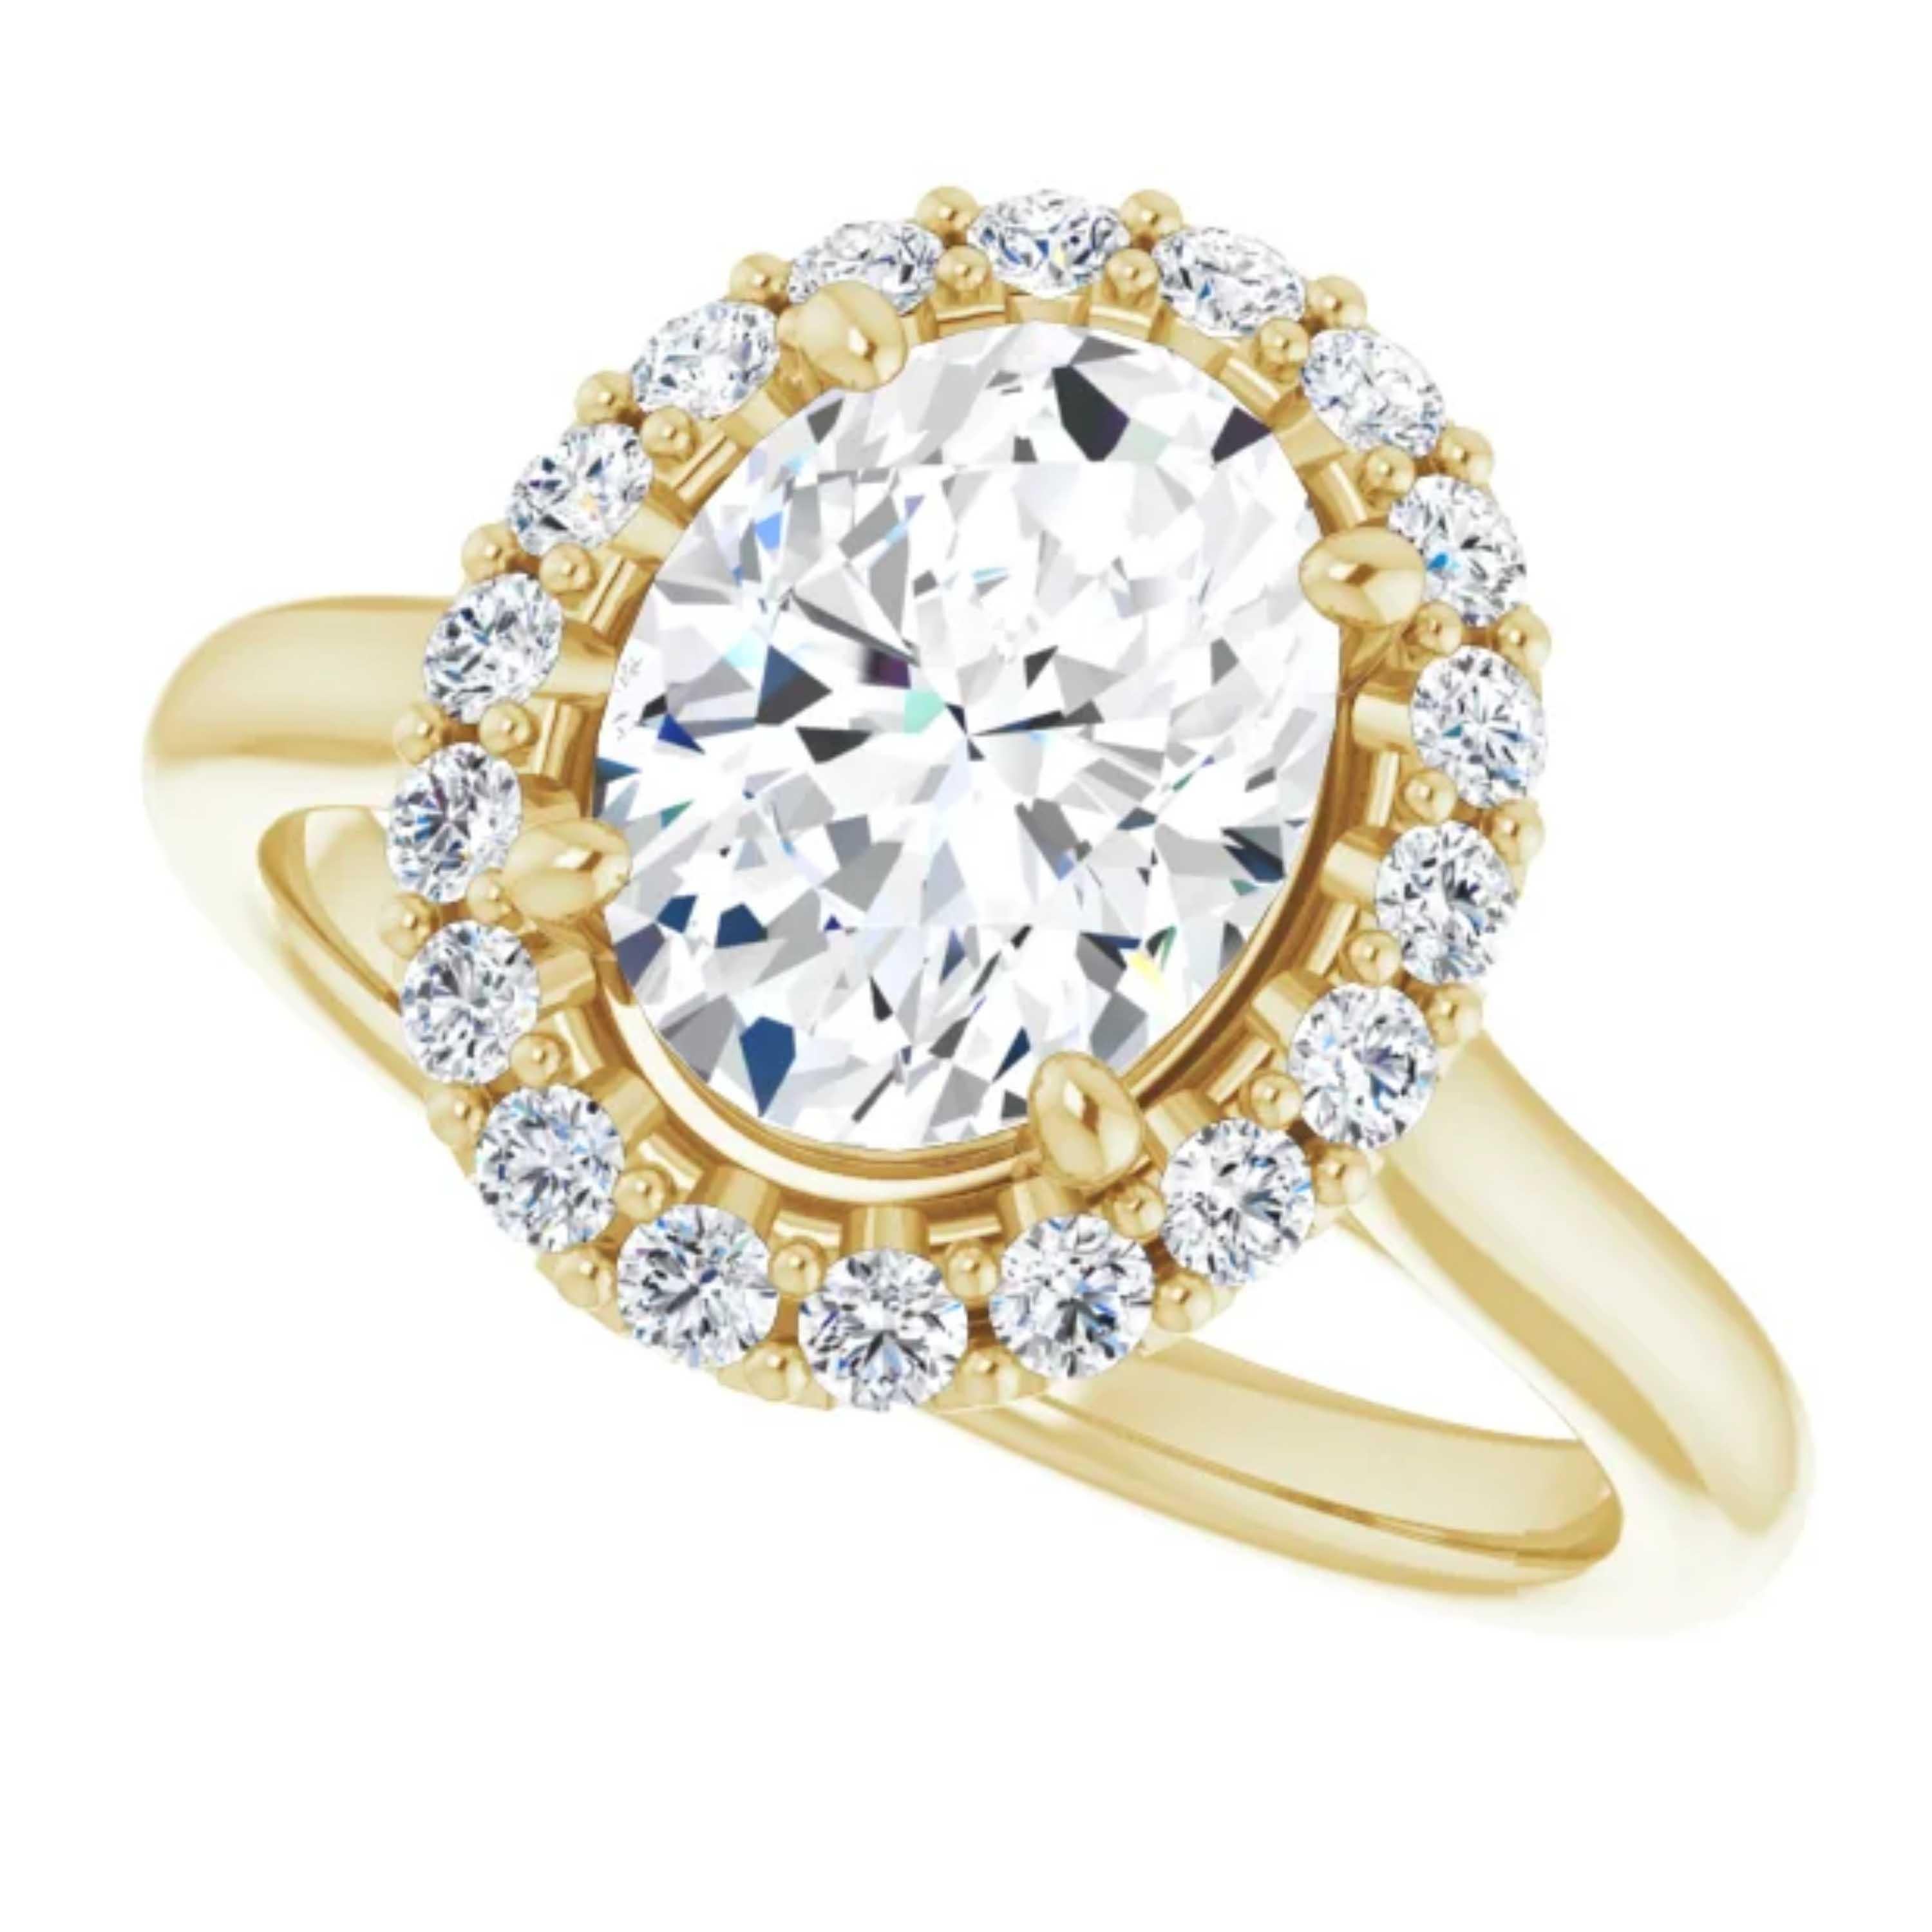 Halo GIA Oval Brilliant Diamond Engagement Ring Yellow Gold In New Condition For Sale In Los Angeles, CA